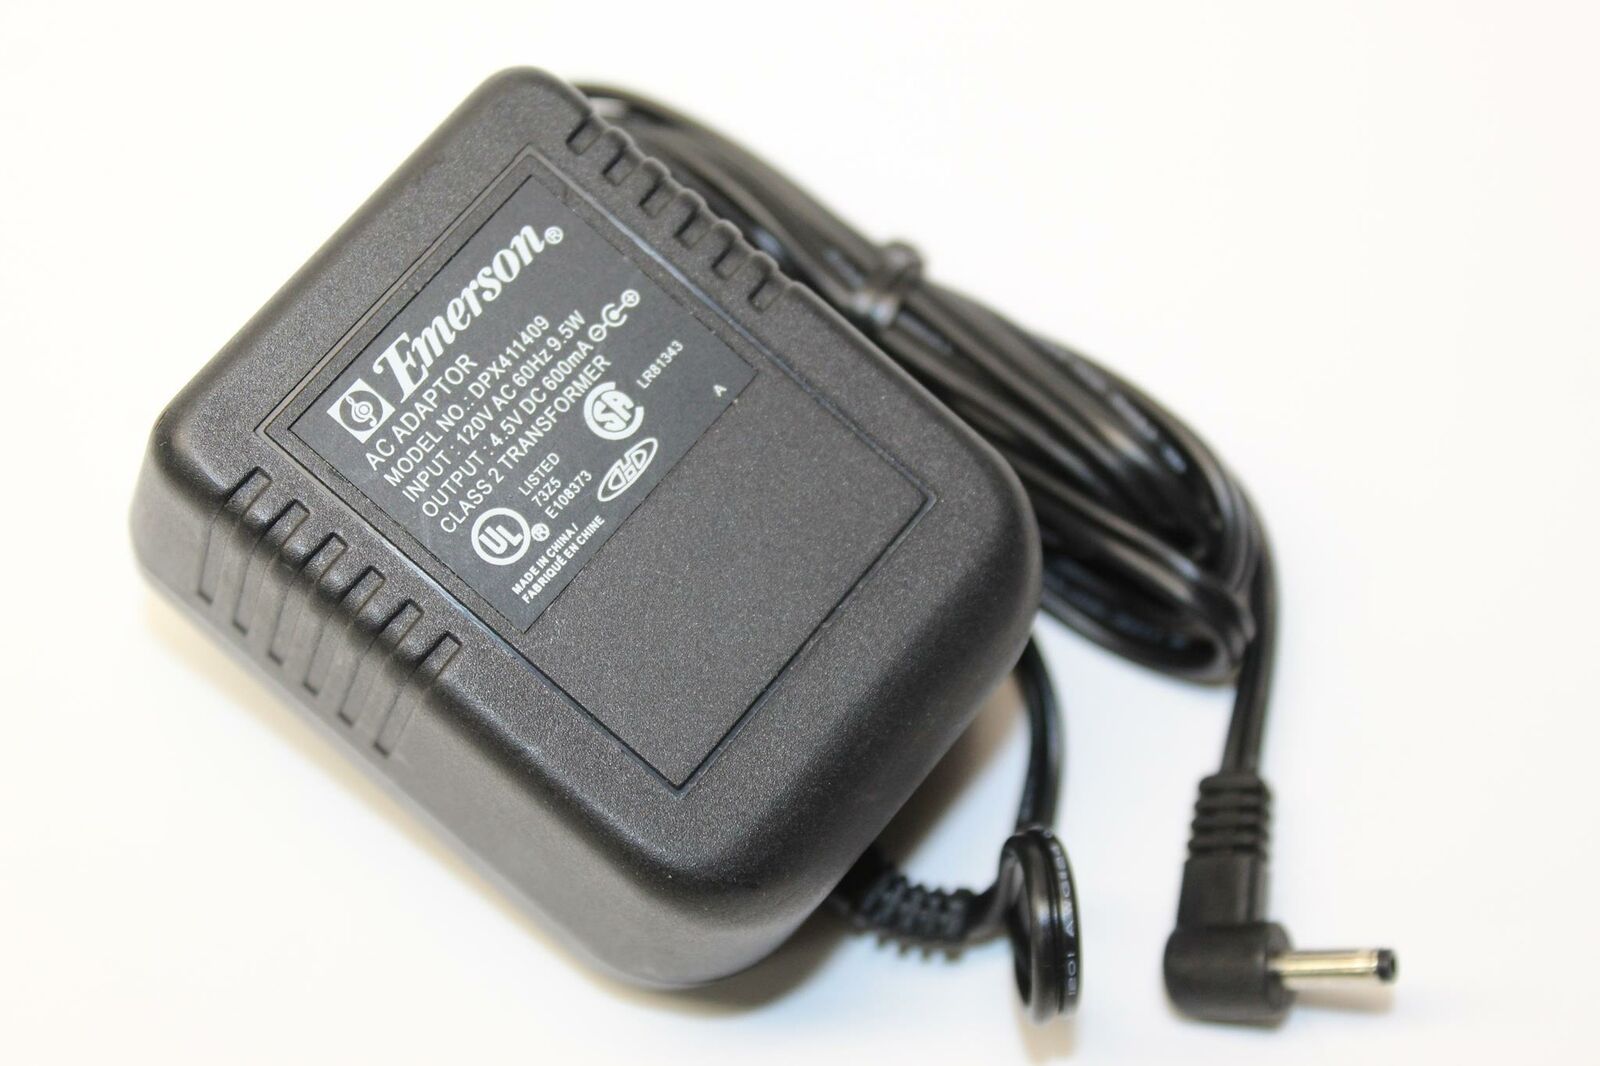 New Emerson DPX411409 4.5V DC 600mA AC Power Supply Adapter Charger